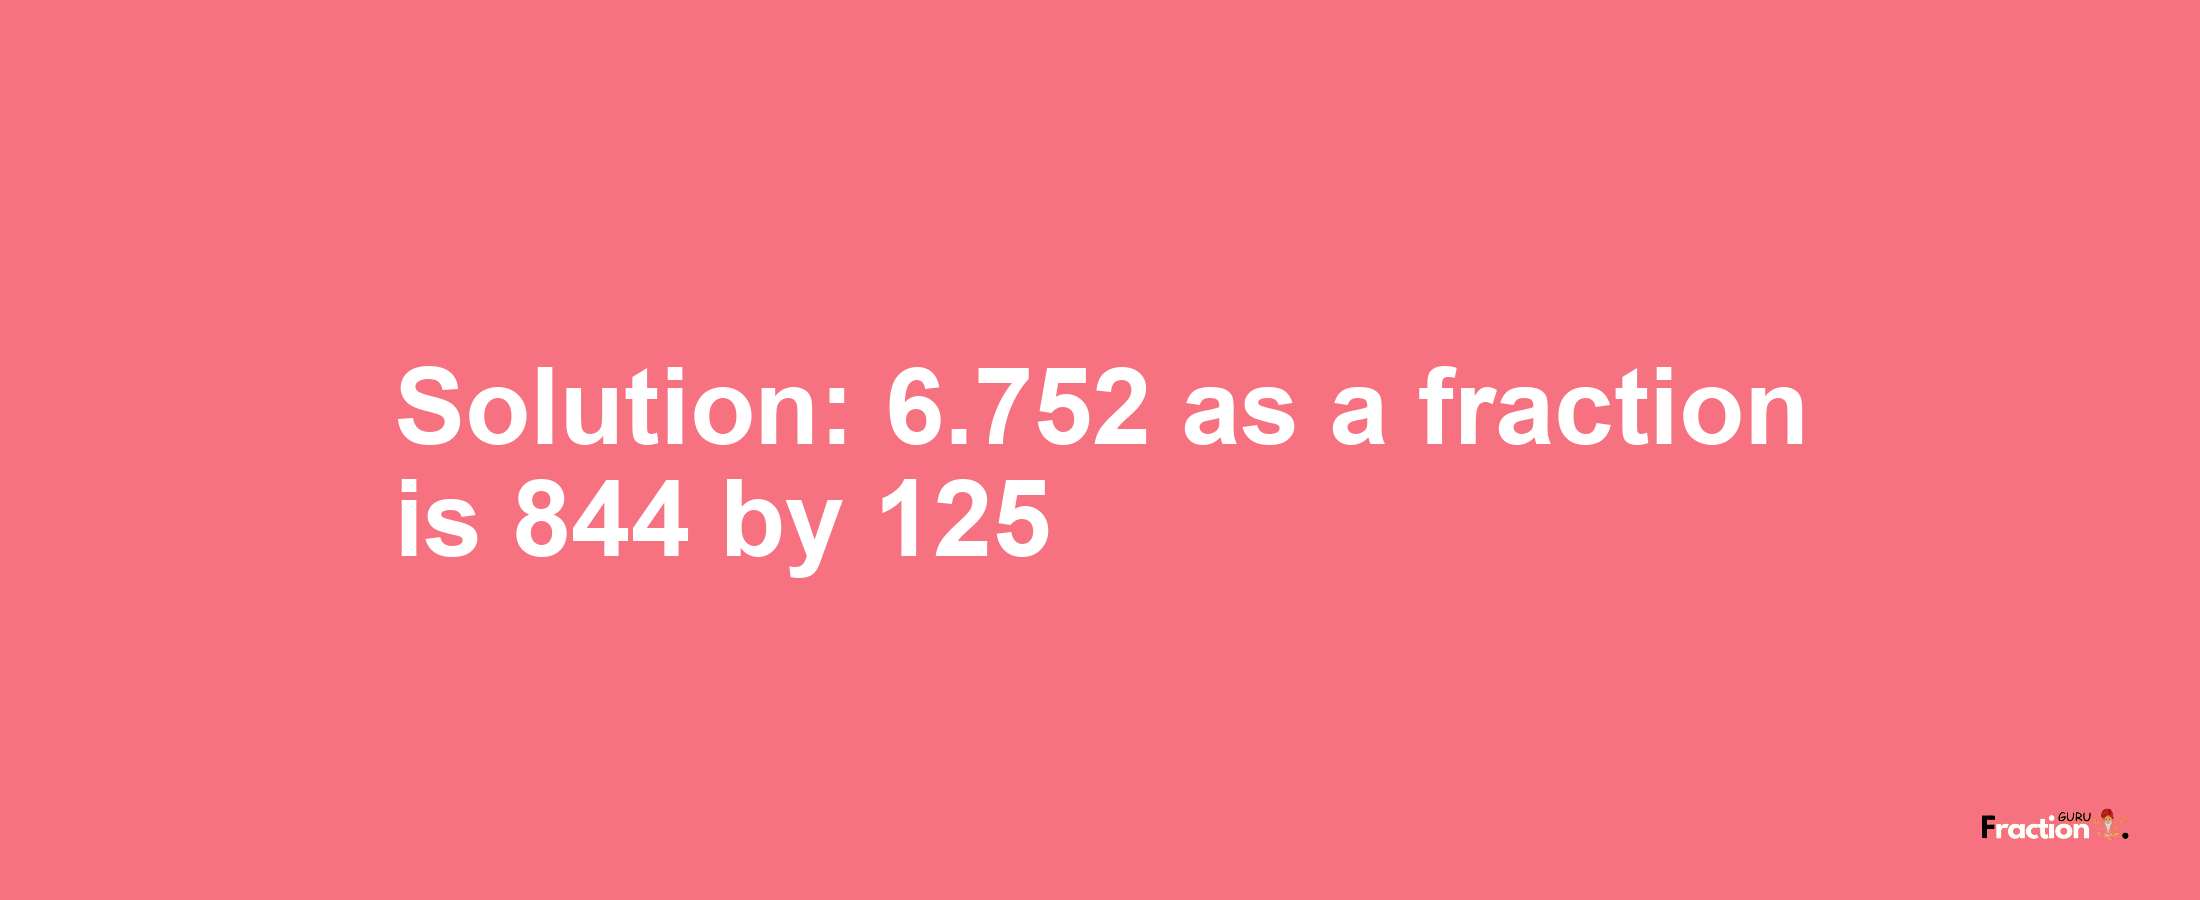 Solution:6.752 as a fraction is 844/125